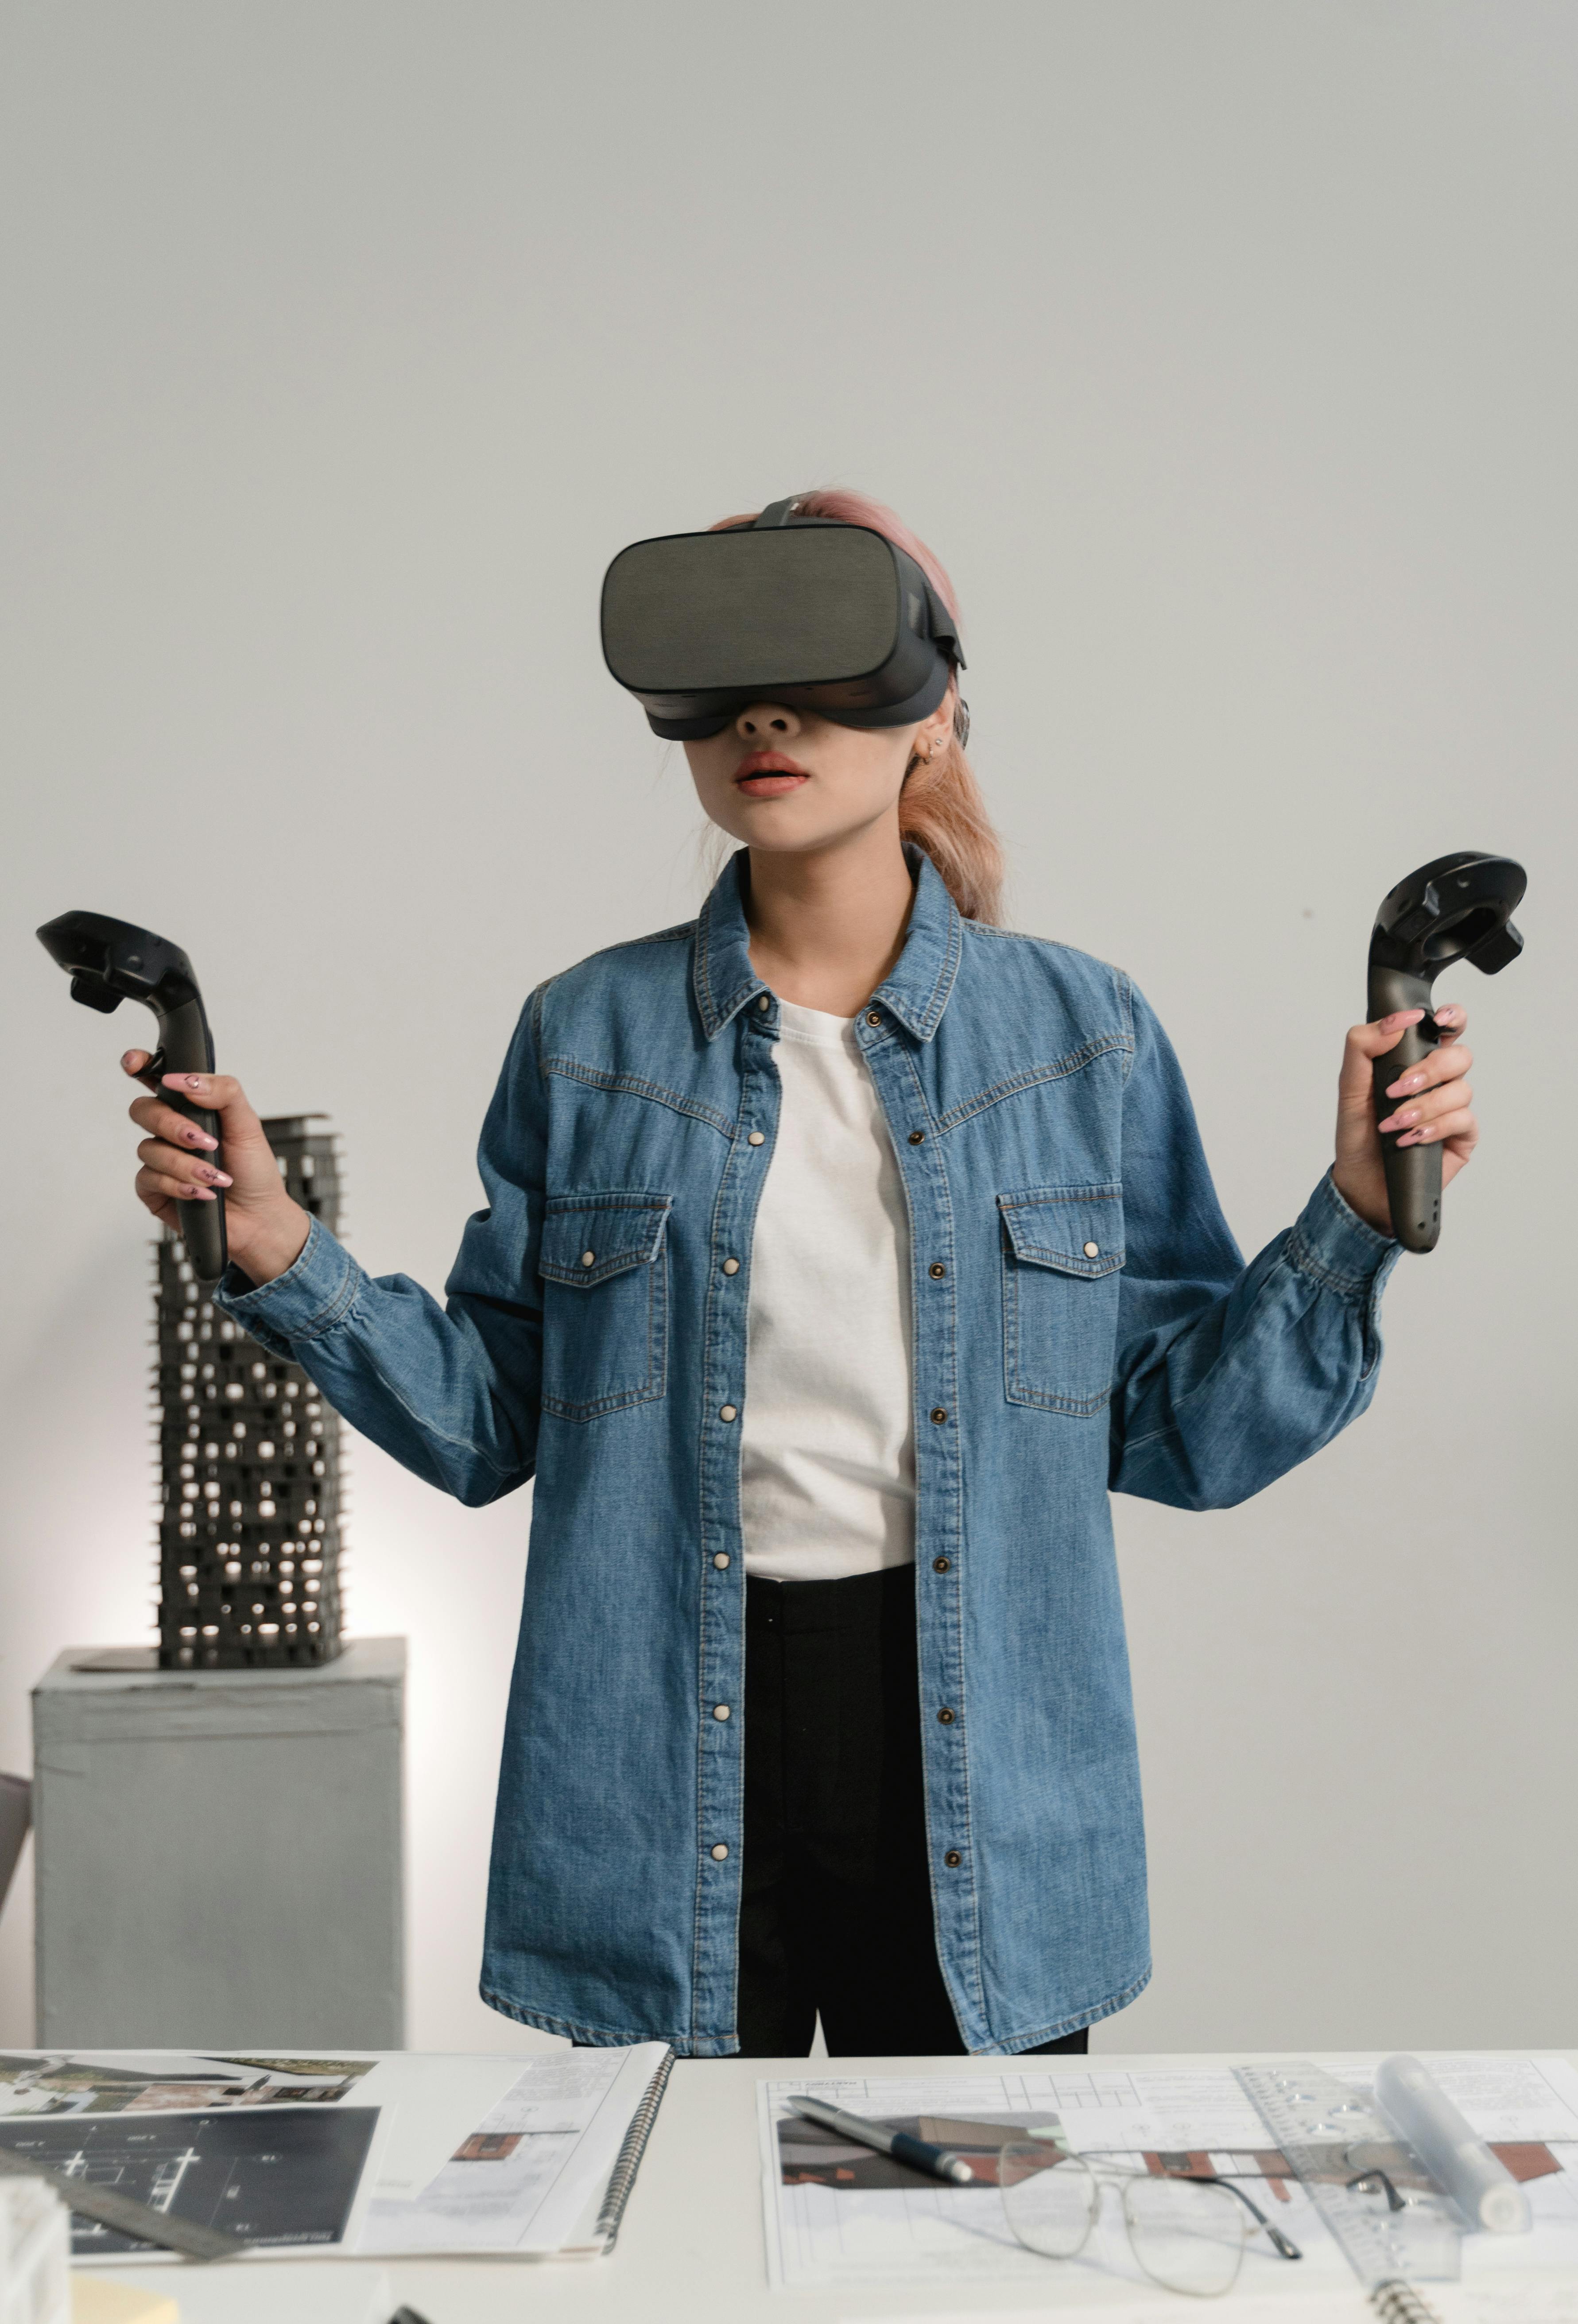 woman in denim shirt using an oculus virtual reality headset with controllers